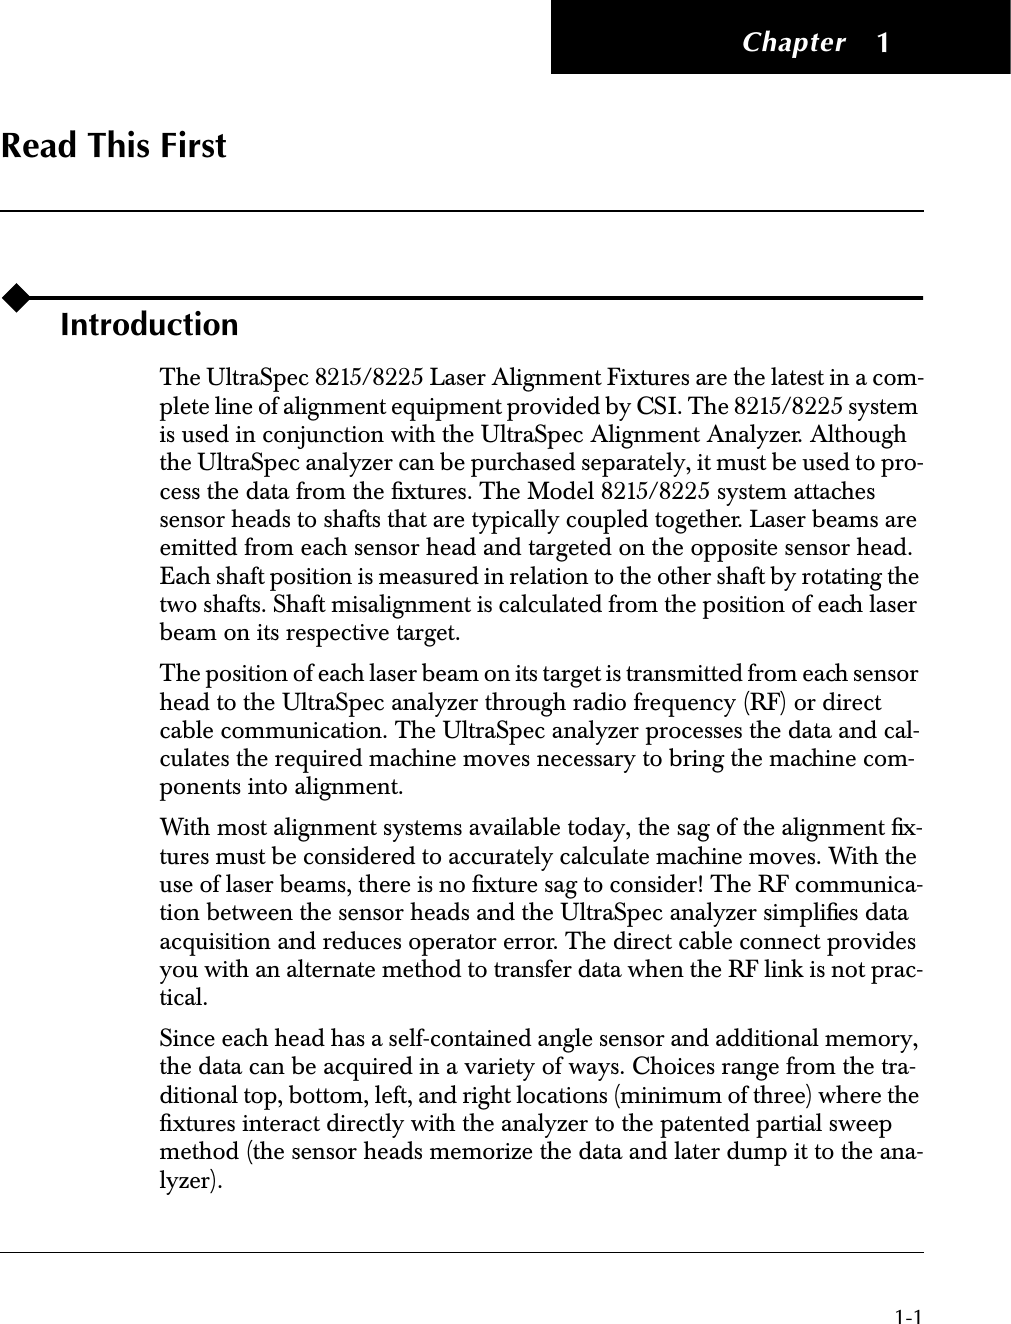  Chapter 1-1 1 Read This First Introduction The UltraSpec 8215/8225 Laser Alignment Fixtures are the latest in a com-plete line of alignment equipment provided by CSI. The 8215/8225 system is used in conjunction with the UltraSpec Alignment Analyzer. Although the UltraSpec analyzer can be purchased separately, it must be used to pro-cess the data from the ﬁxtures. The Model 8215/8225 system attaches sensor heads to shafts that are typically coupled together. Laser beams are emitted from each sensor head and targeted on the opposite sensor head. Each shaft position is measured in relation to the other shaft by rotating the two shafts. Shaft misalignment is calculated from the position of each laser beam on its respective target.The position of each laser beam on its target is transmitted from each sensor head to the UltraSpec analyzer through radio frequency (RF) or direct cable communication. The UltraSpec analyzer processes the data and cal-culates the required machine moves necessary to bring the machine com-ponents into alignment.With most alignment systems available today, the sag of the alignment ﬁx-tures must be considered to accurately calculate machine moves. With the use of laser beams, there is no ﬁxture sag to consider! The RF communica-tion between the sensor heads and the UltraSpec analyzer simpliﬁes data acquisition and reduces operator error. The direct cable connect provides you with an alternate method to transfer data when the RF link is not prac-tical.Since each head has a self-contained angle sensor and additional memory, the data can be acquired in a variety of ways. Choices range from the tra-ditional top, bottom, left, and right locations (minimum of three) where the ﬁxtures interact directly with the analyzer to the patented partial sweep method (the sensor heads memorize the data and later dump it to the ana-lyzer). 